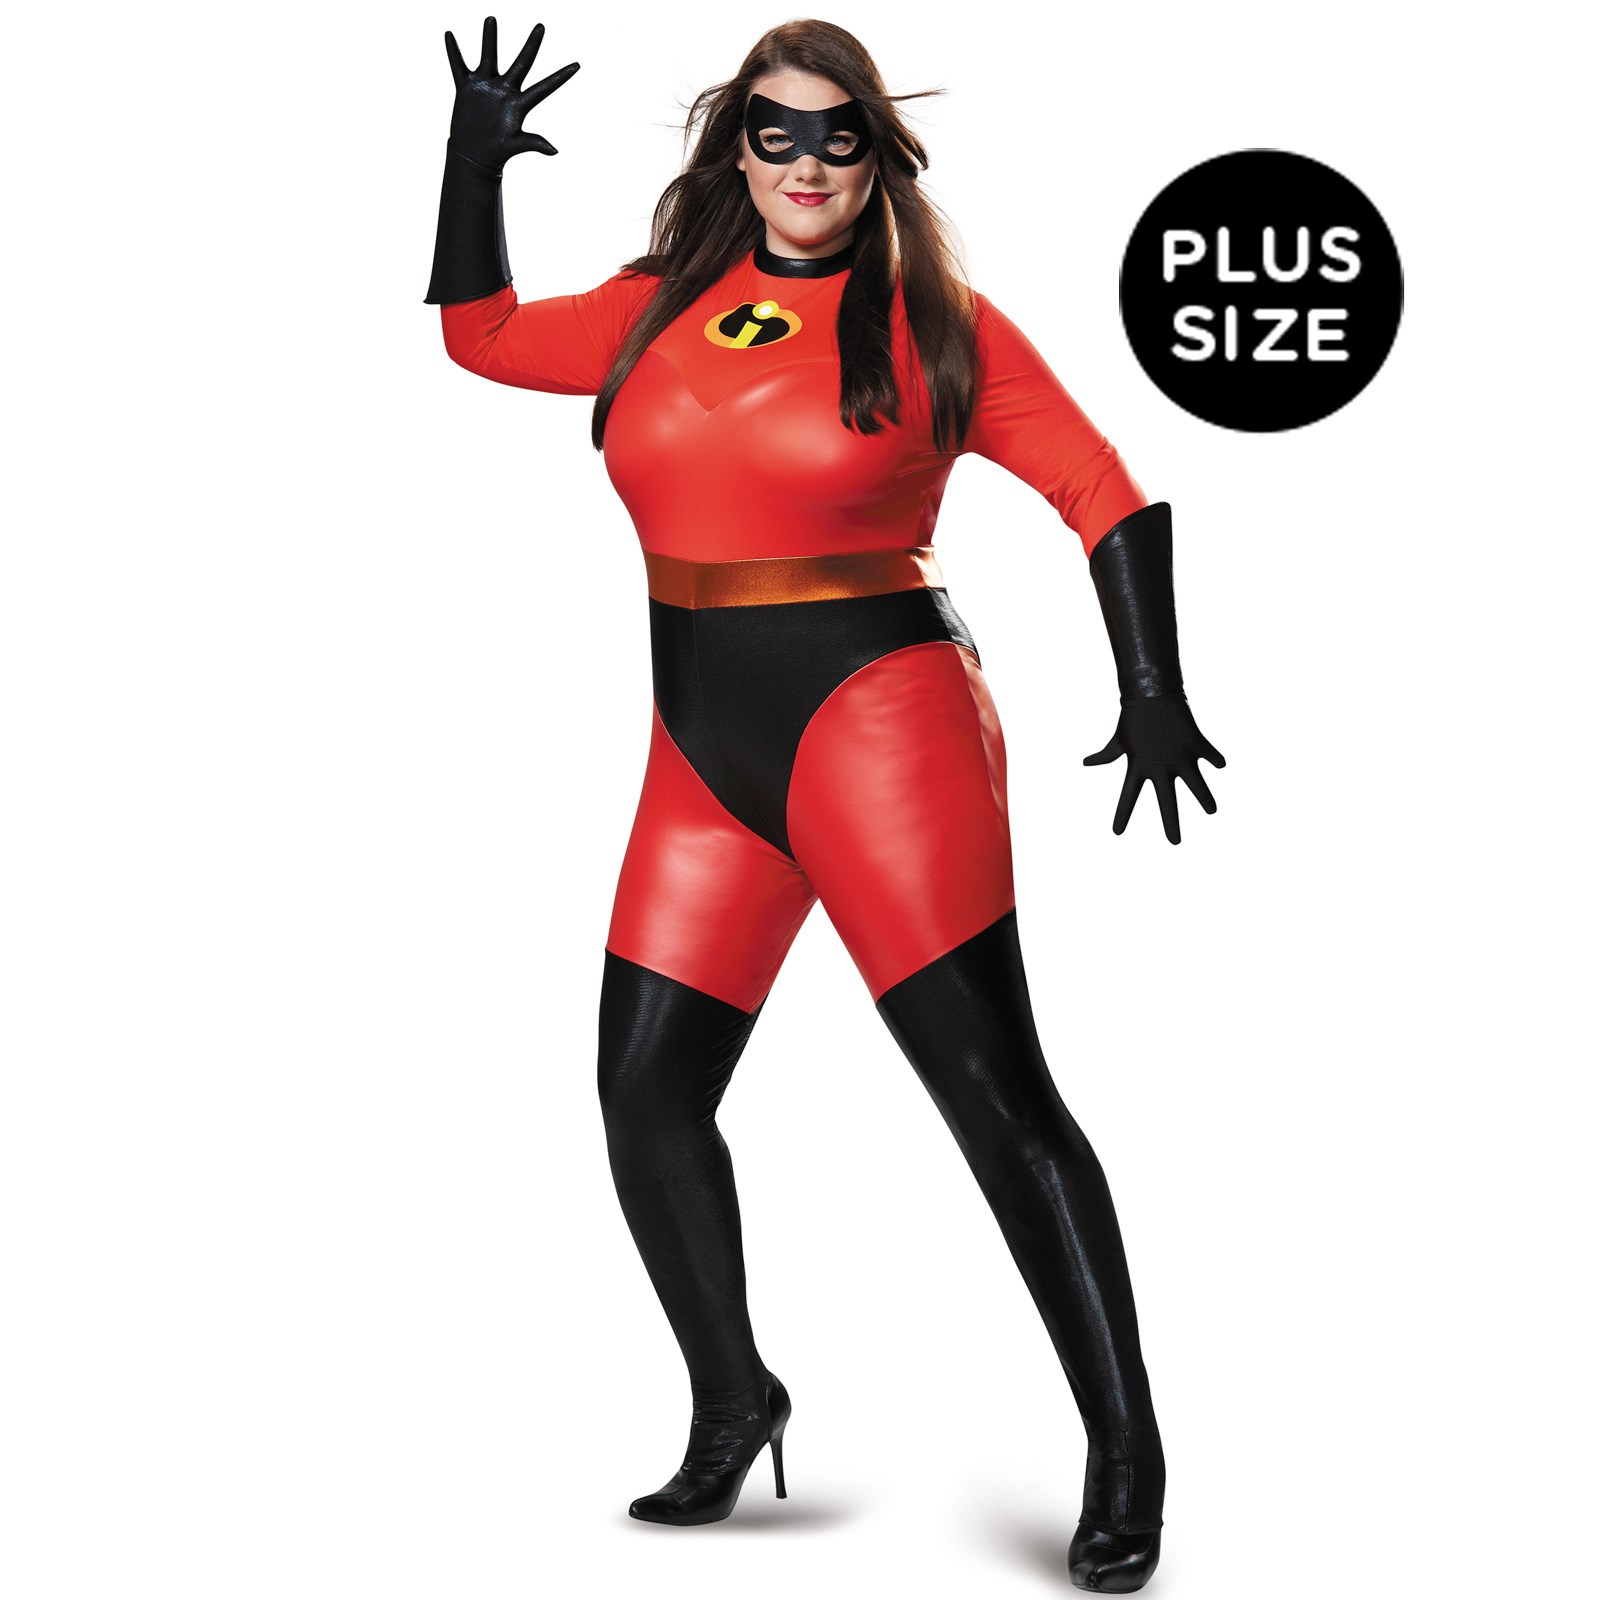 Disneys the Incredibles: Plus Size Mrs. Incredible Bodysuit Costume For Wom...